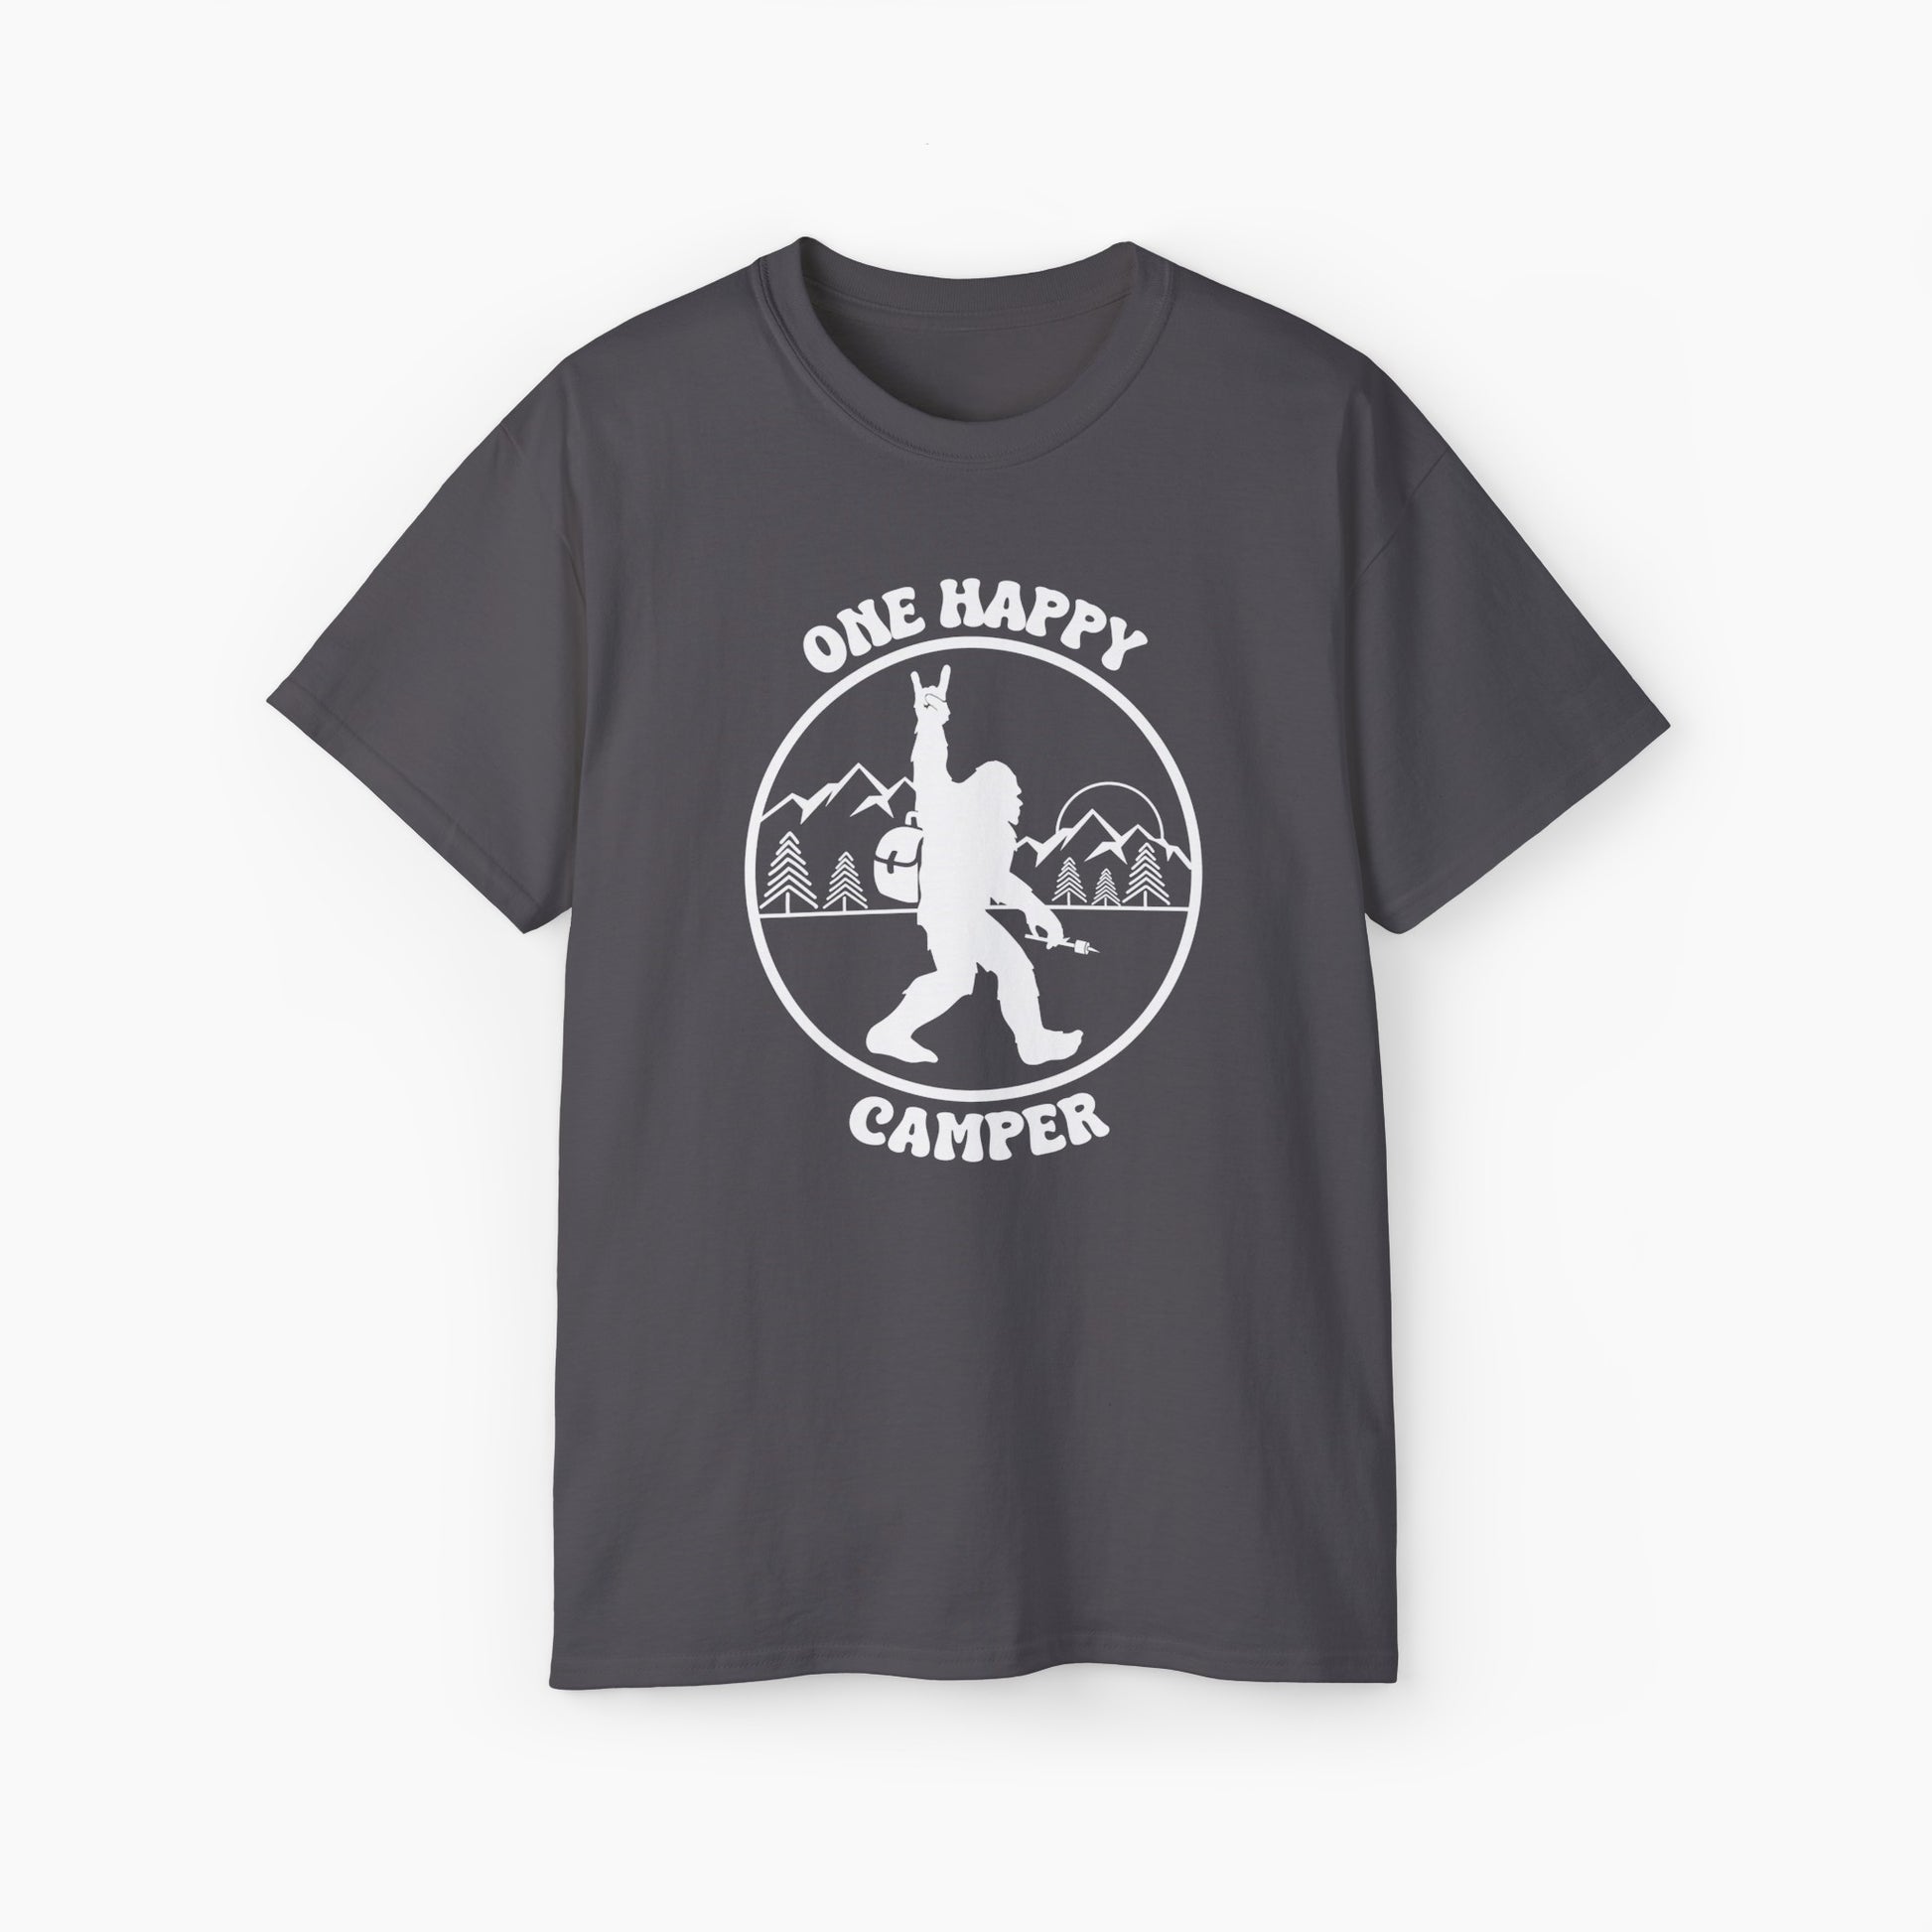 Dark grey t-shirt with 'One Happy Camper' text, featuring Bigfoot making a peace sign, set against a subtle background of trees and mountains.